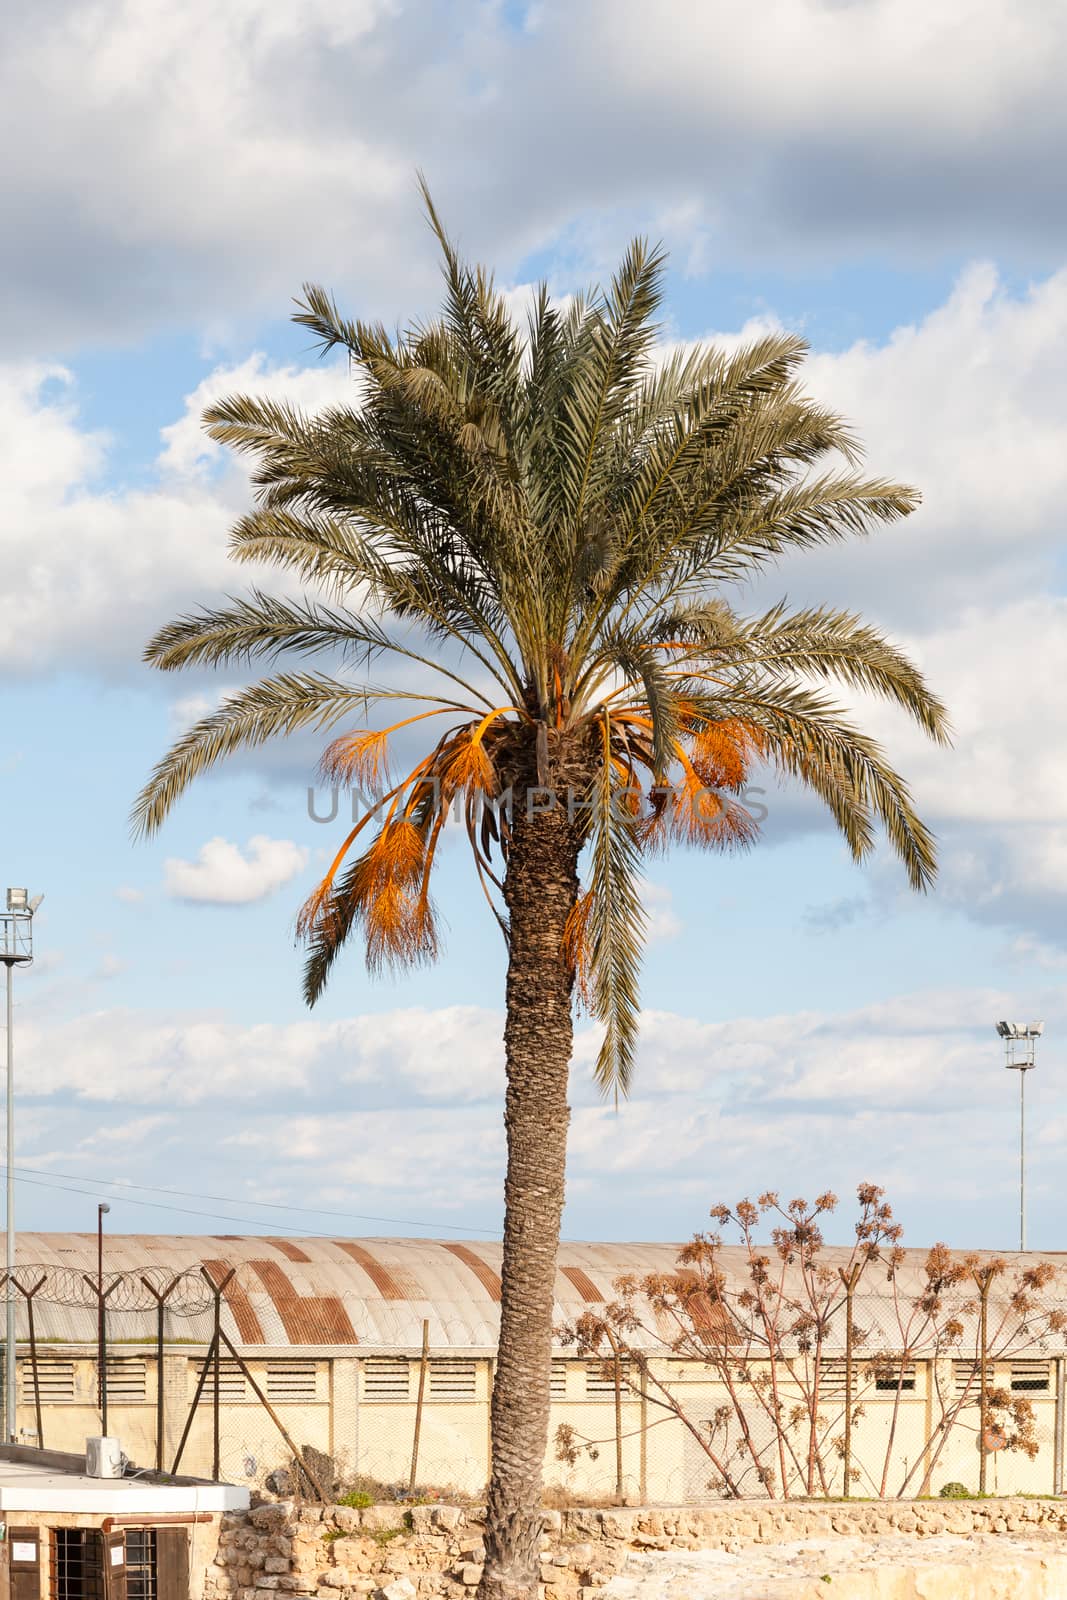 A palm tree pictured on the Mediterranean island of the Turkish Republic of Northern Cyprus.